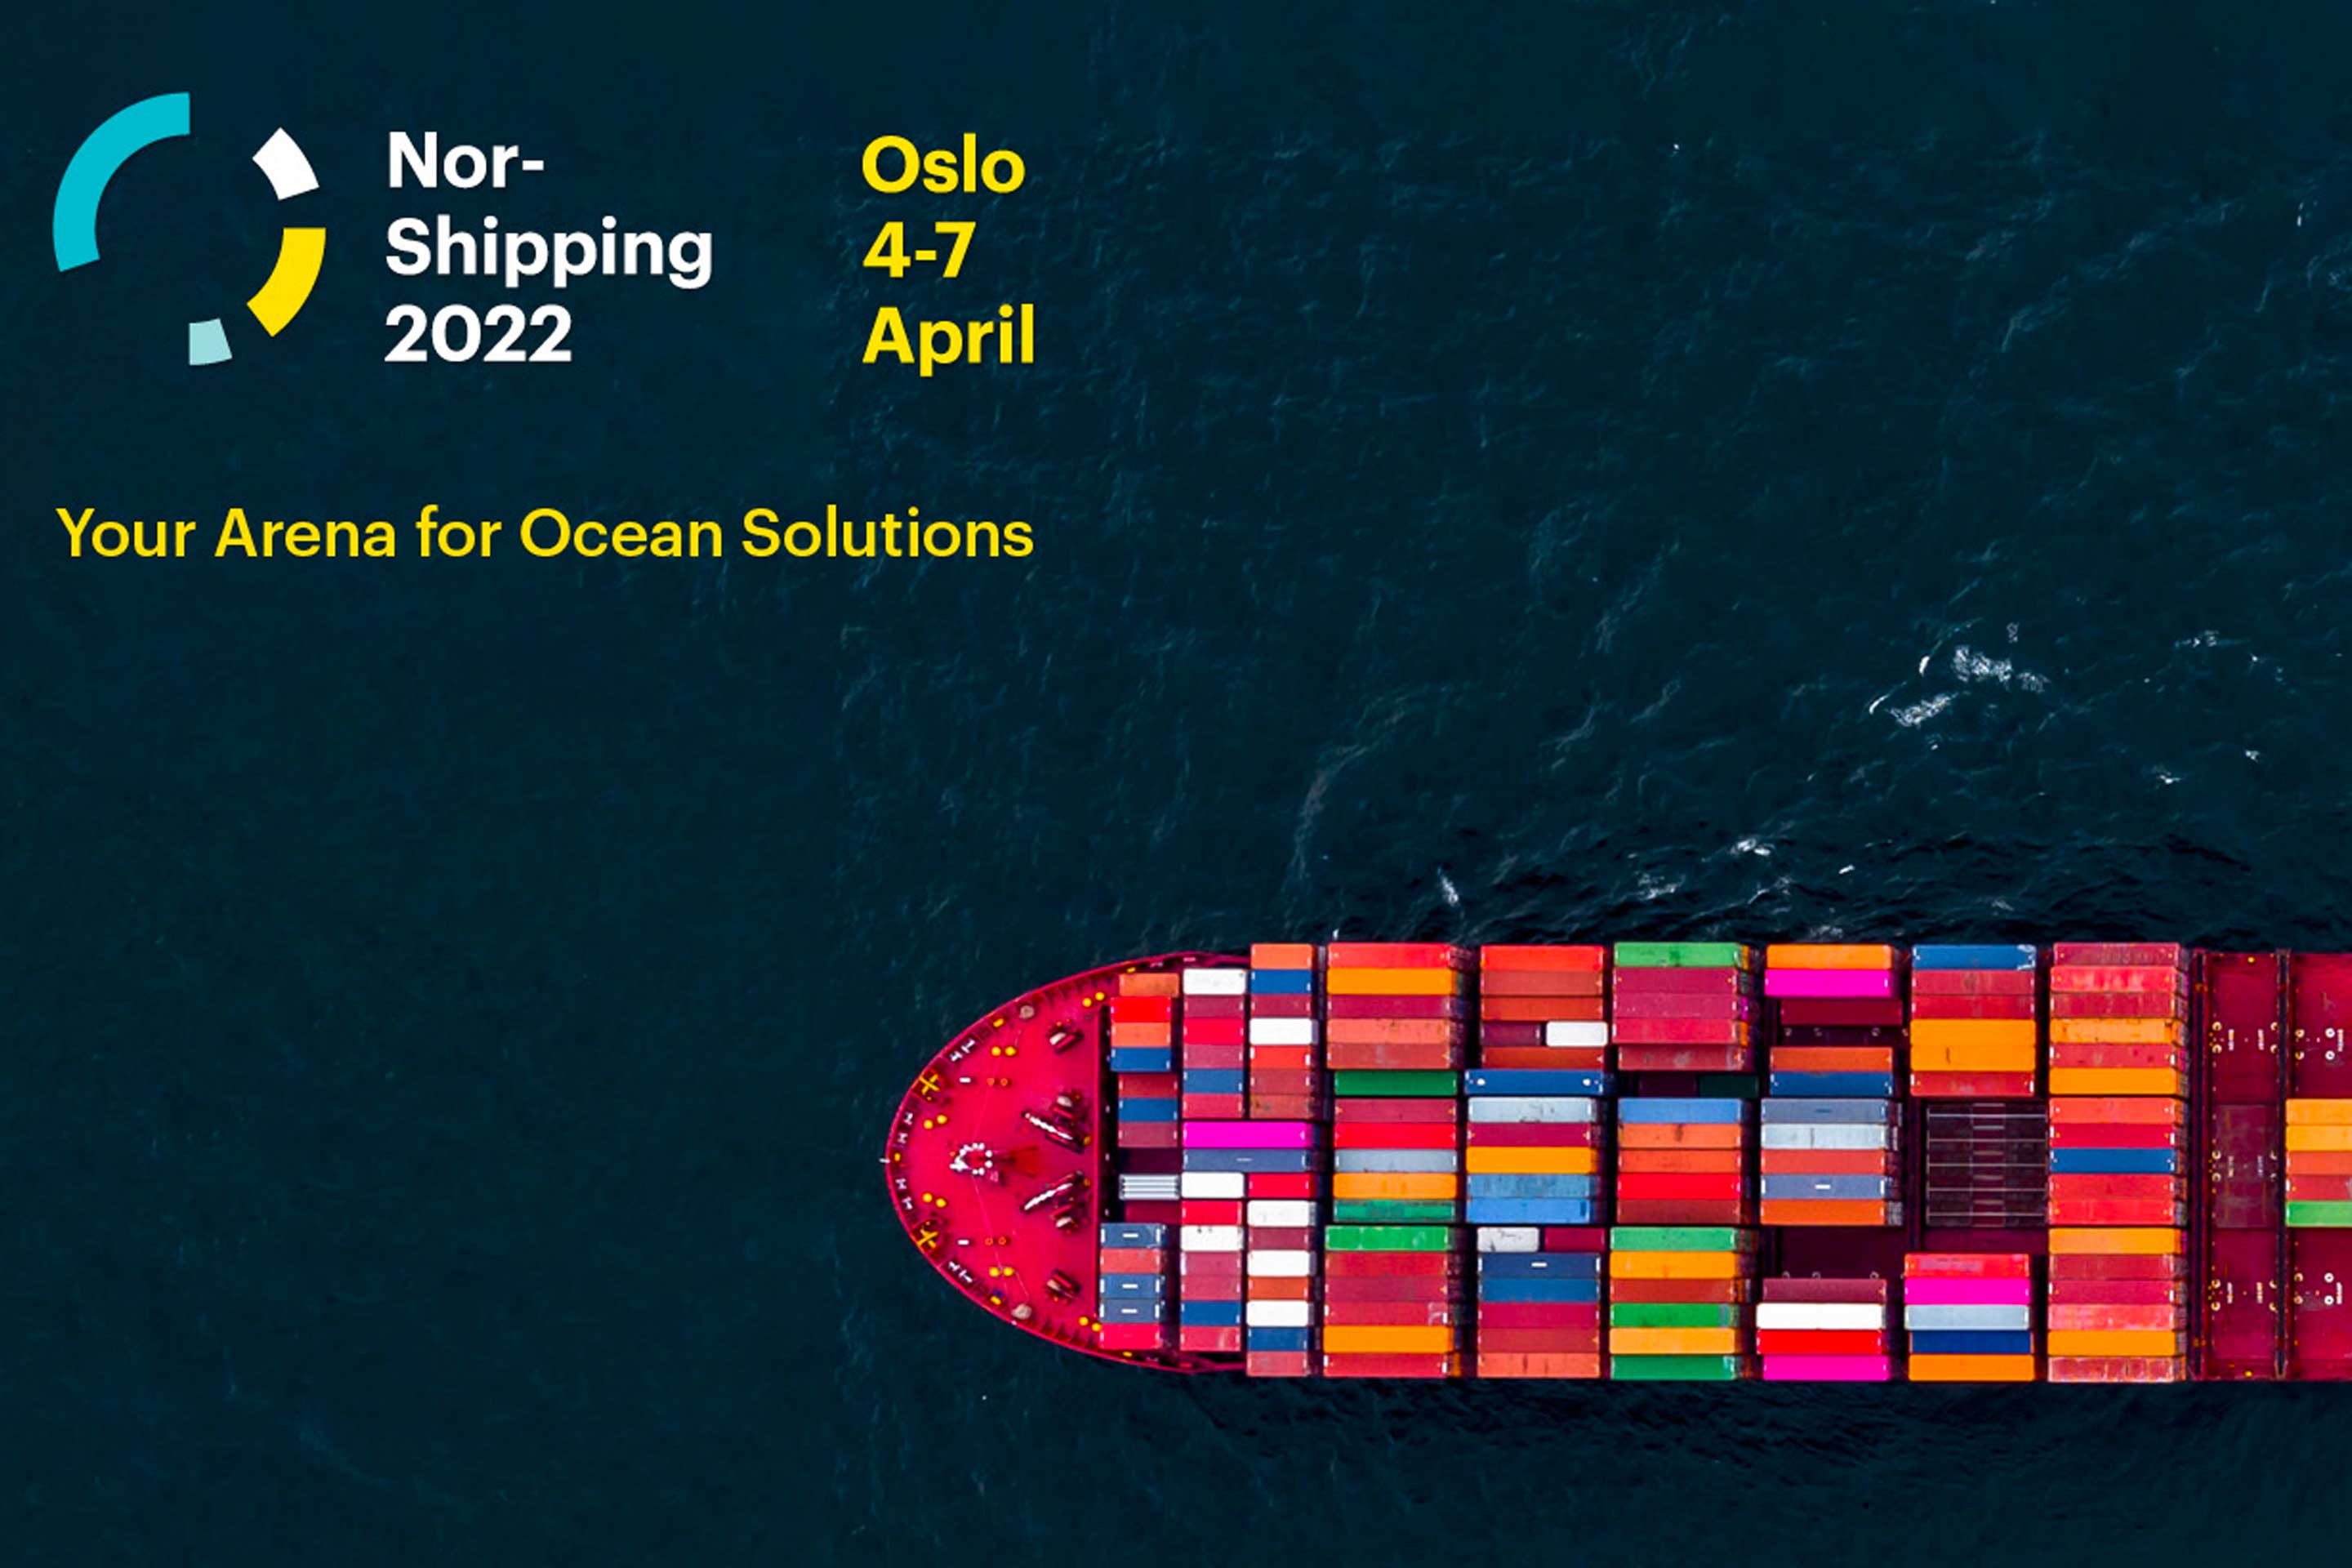 A container ship at sea to highlight Nor-Shipping 2022